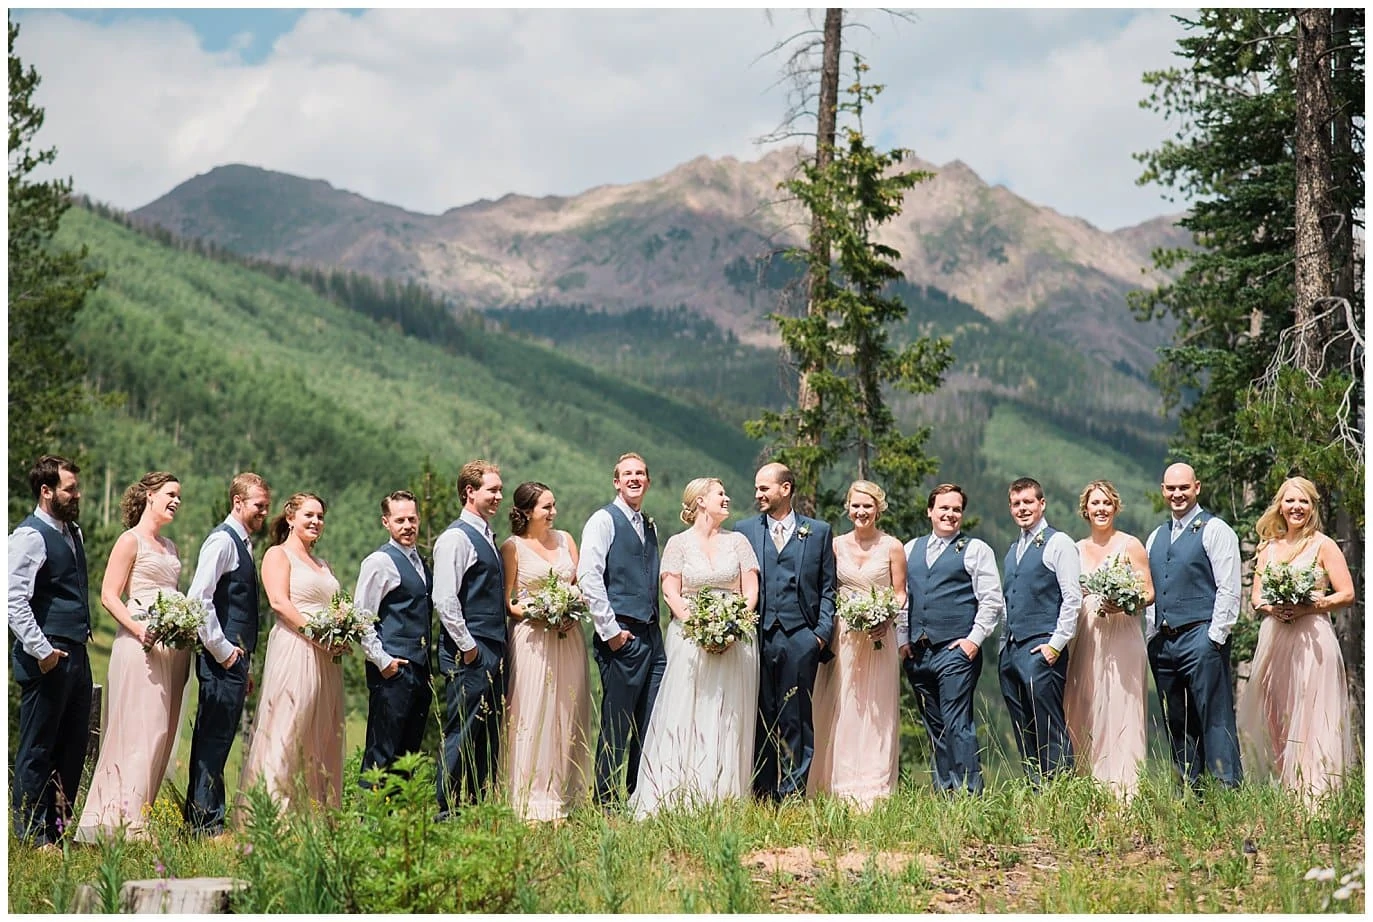 bridal party in front of lake at Piney River Ranch wedding by Beaver Creek Wedding photographer Jennie Crate, Photographer